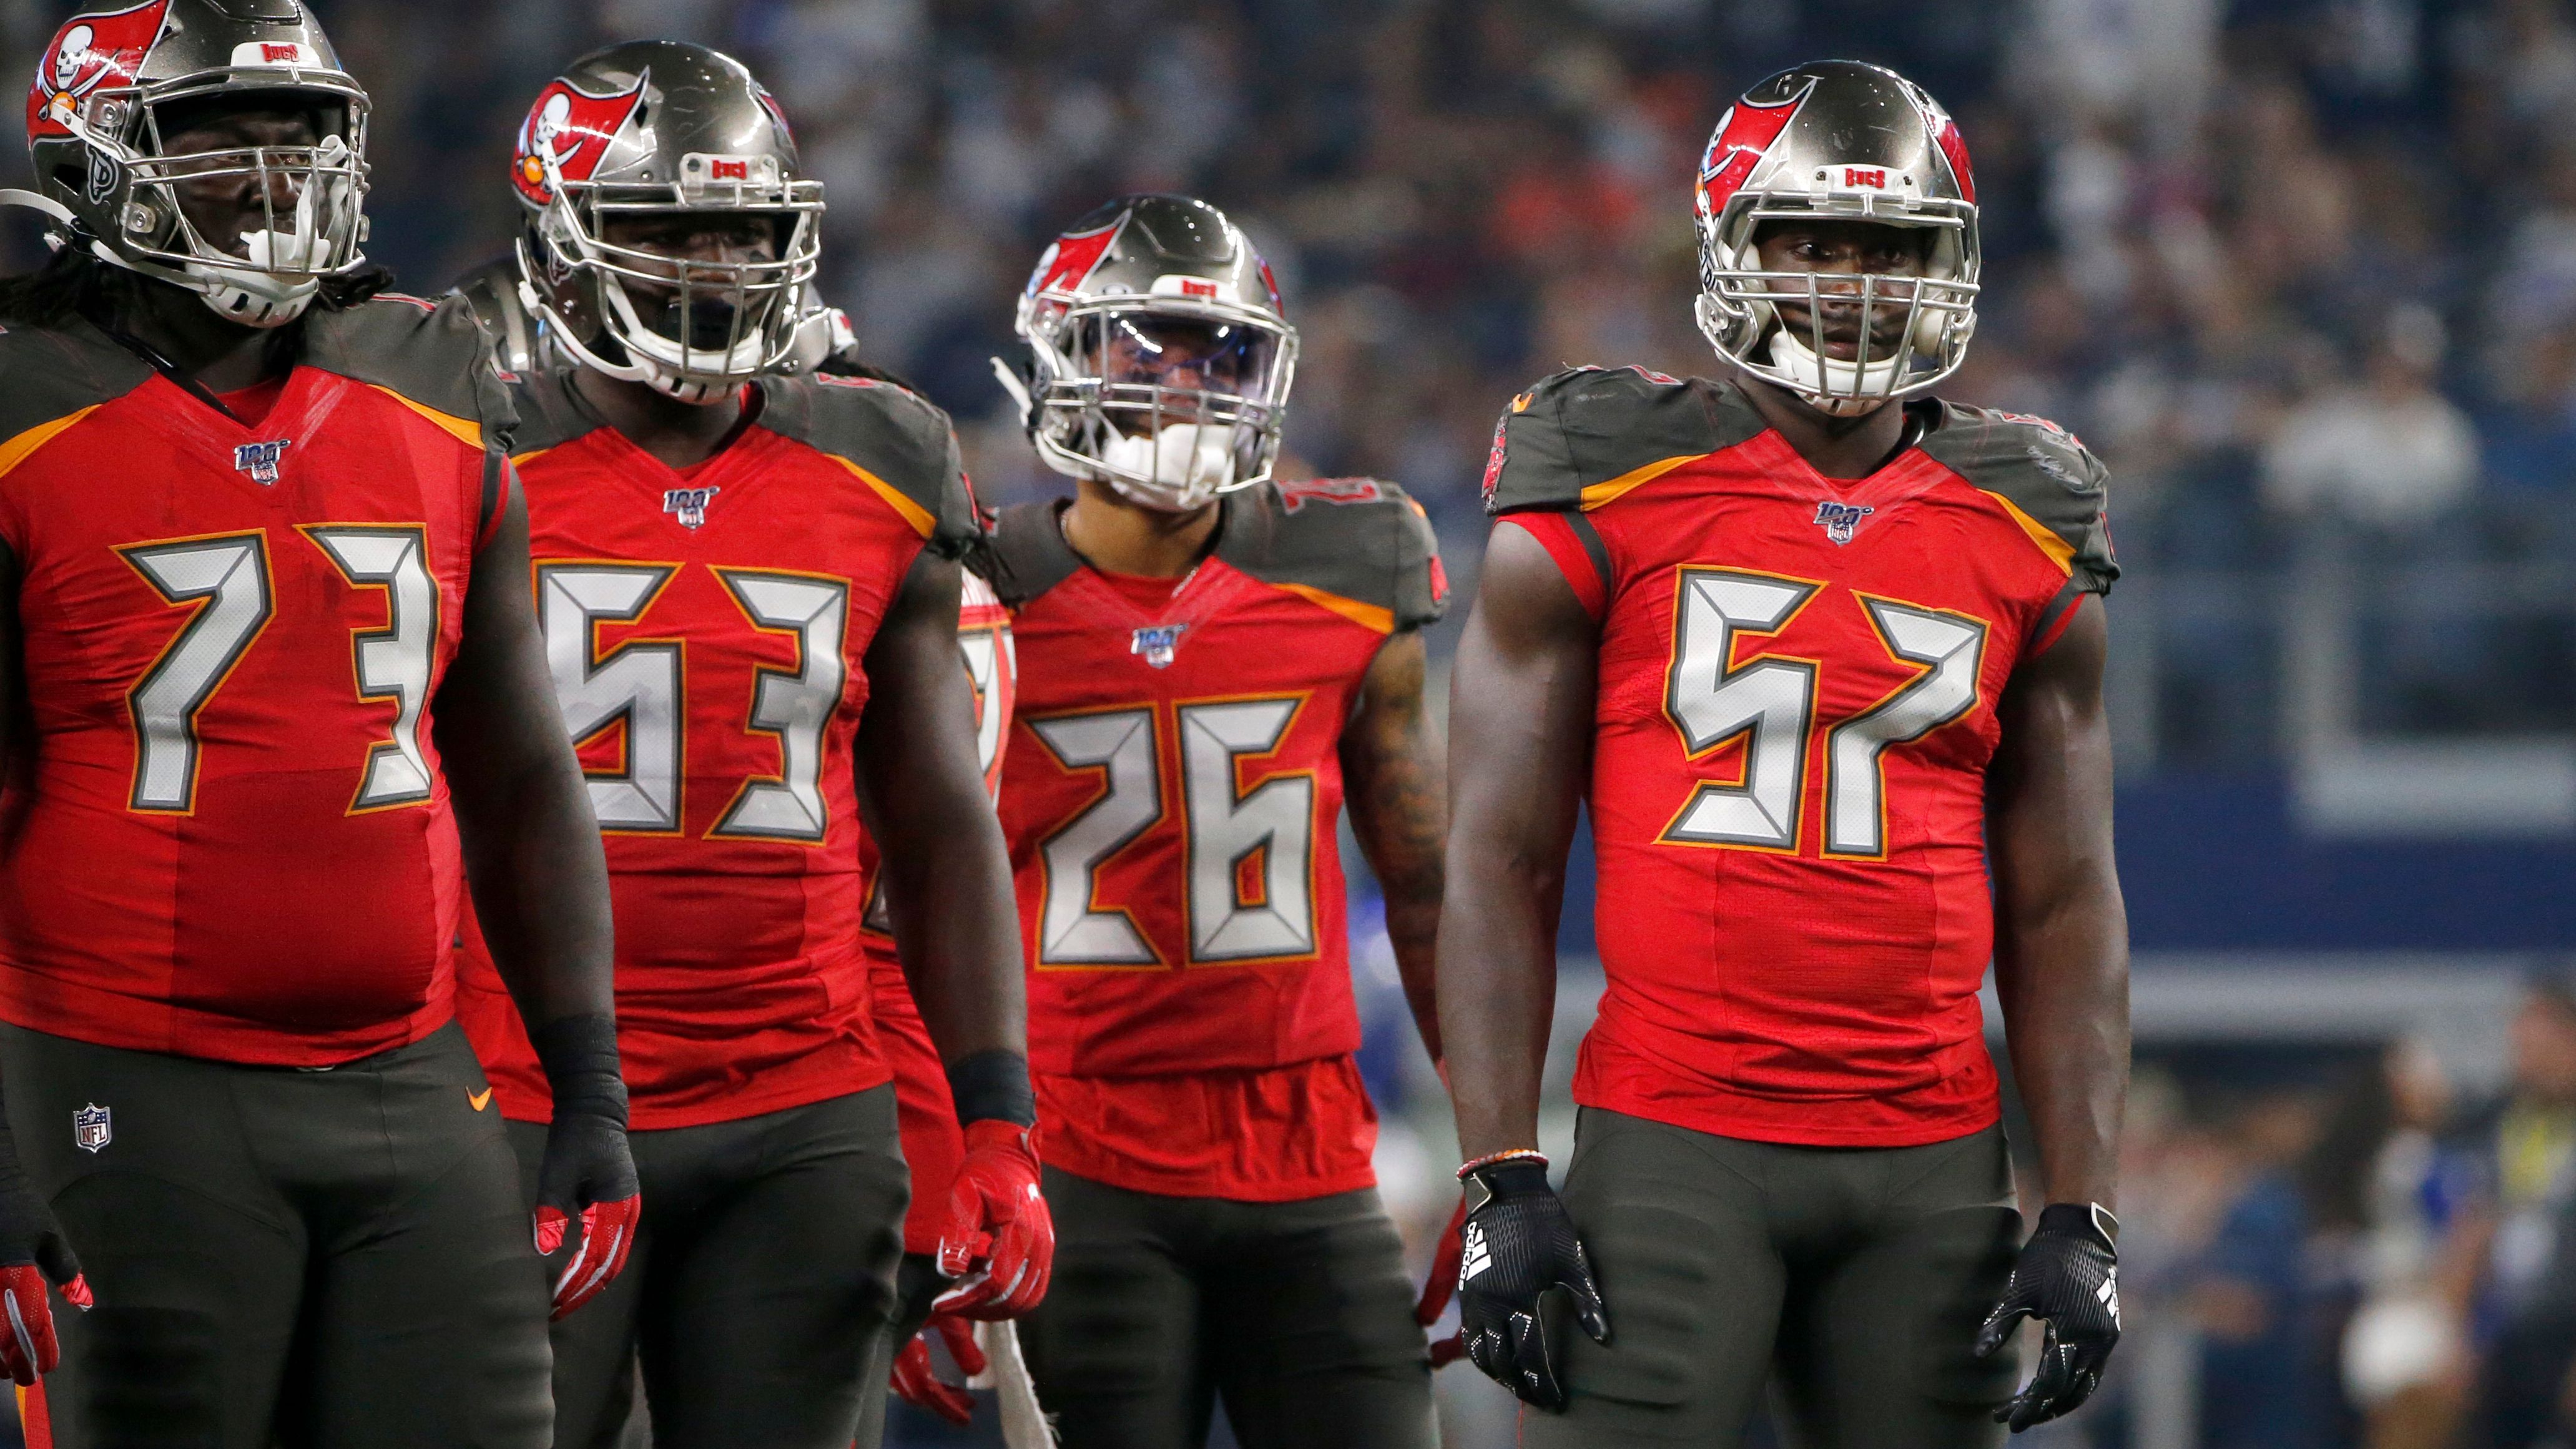 We fixed the Buccaneers uniforms, and now the world is a better place